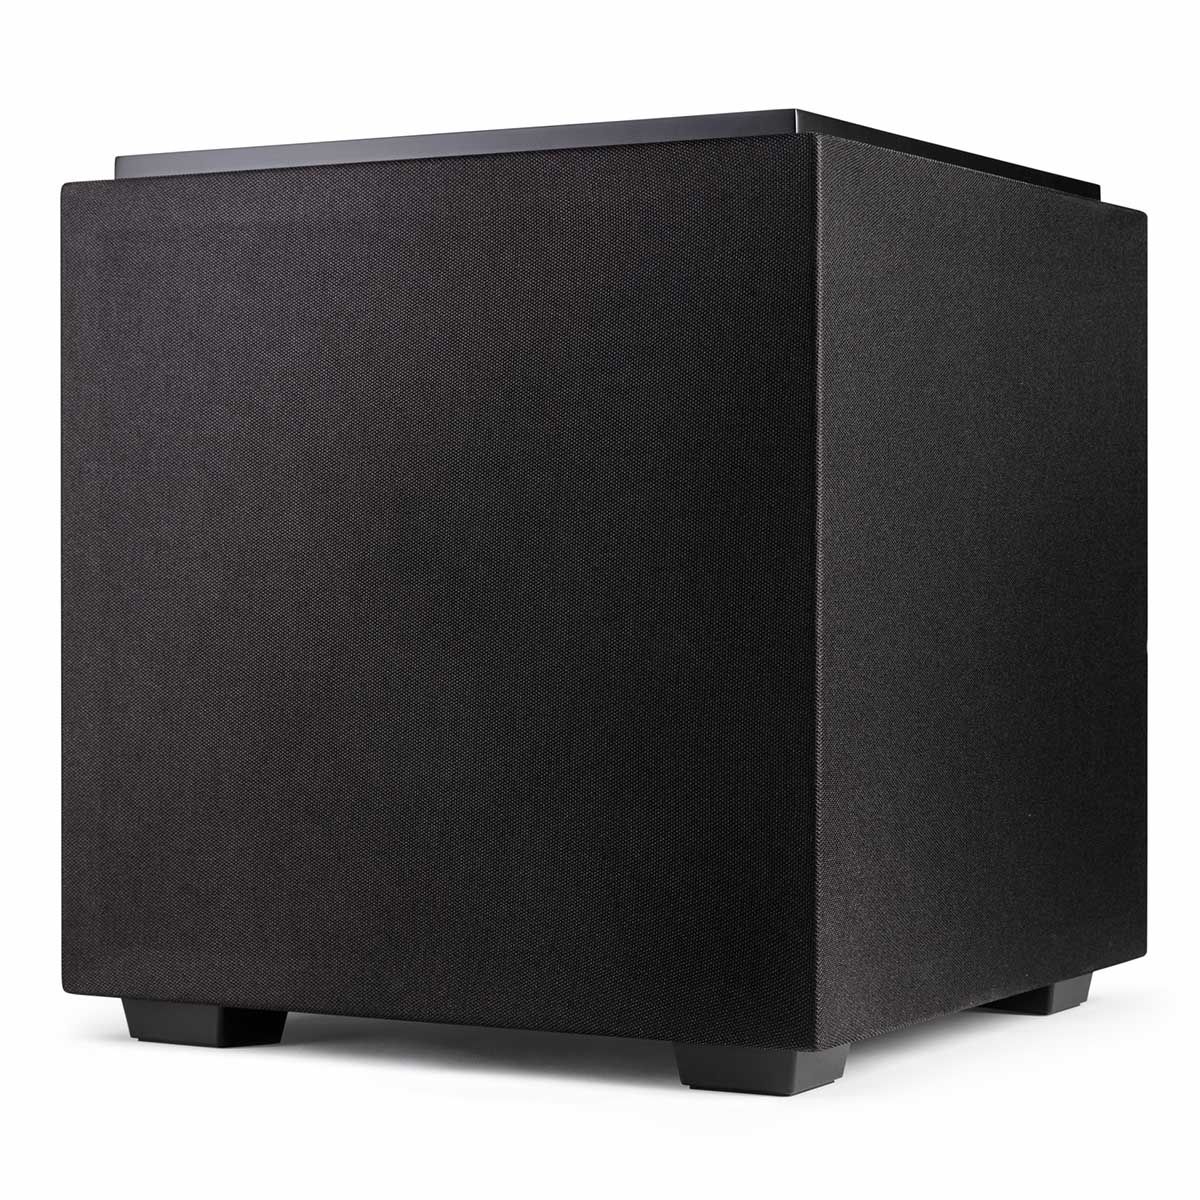 Definitive Technology Descend 10" Subwoofer, Midnight Black, front right angle